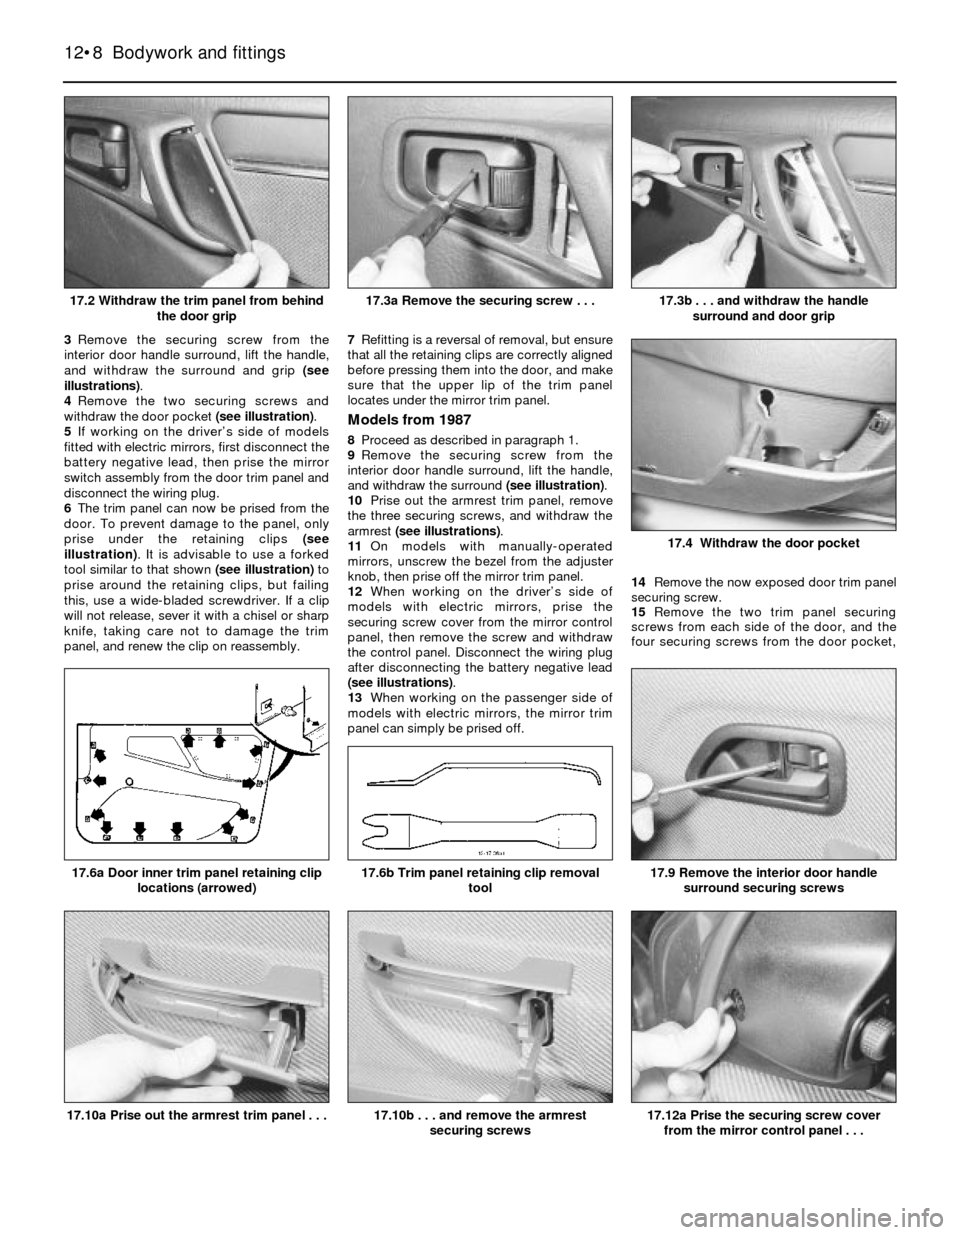 FORD SIERRA 1991 2.G Bodywork And Fittings Workshop Manual 3Remove the securing screw from the
interior door handle surround, lift the handle,
and withdraw the surround and grip (see
illustrations).
4Remove the two securing screws and
withdraw the door pocket